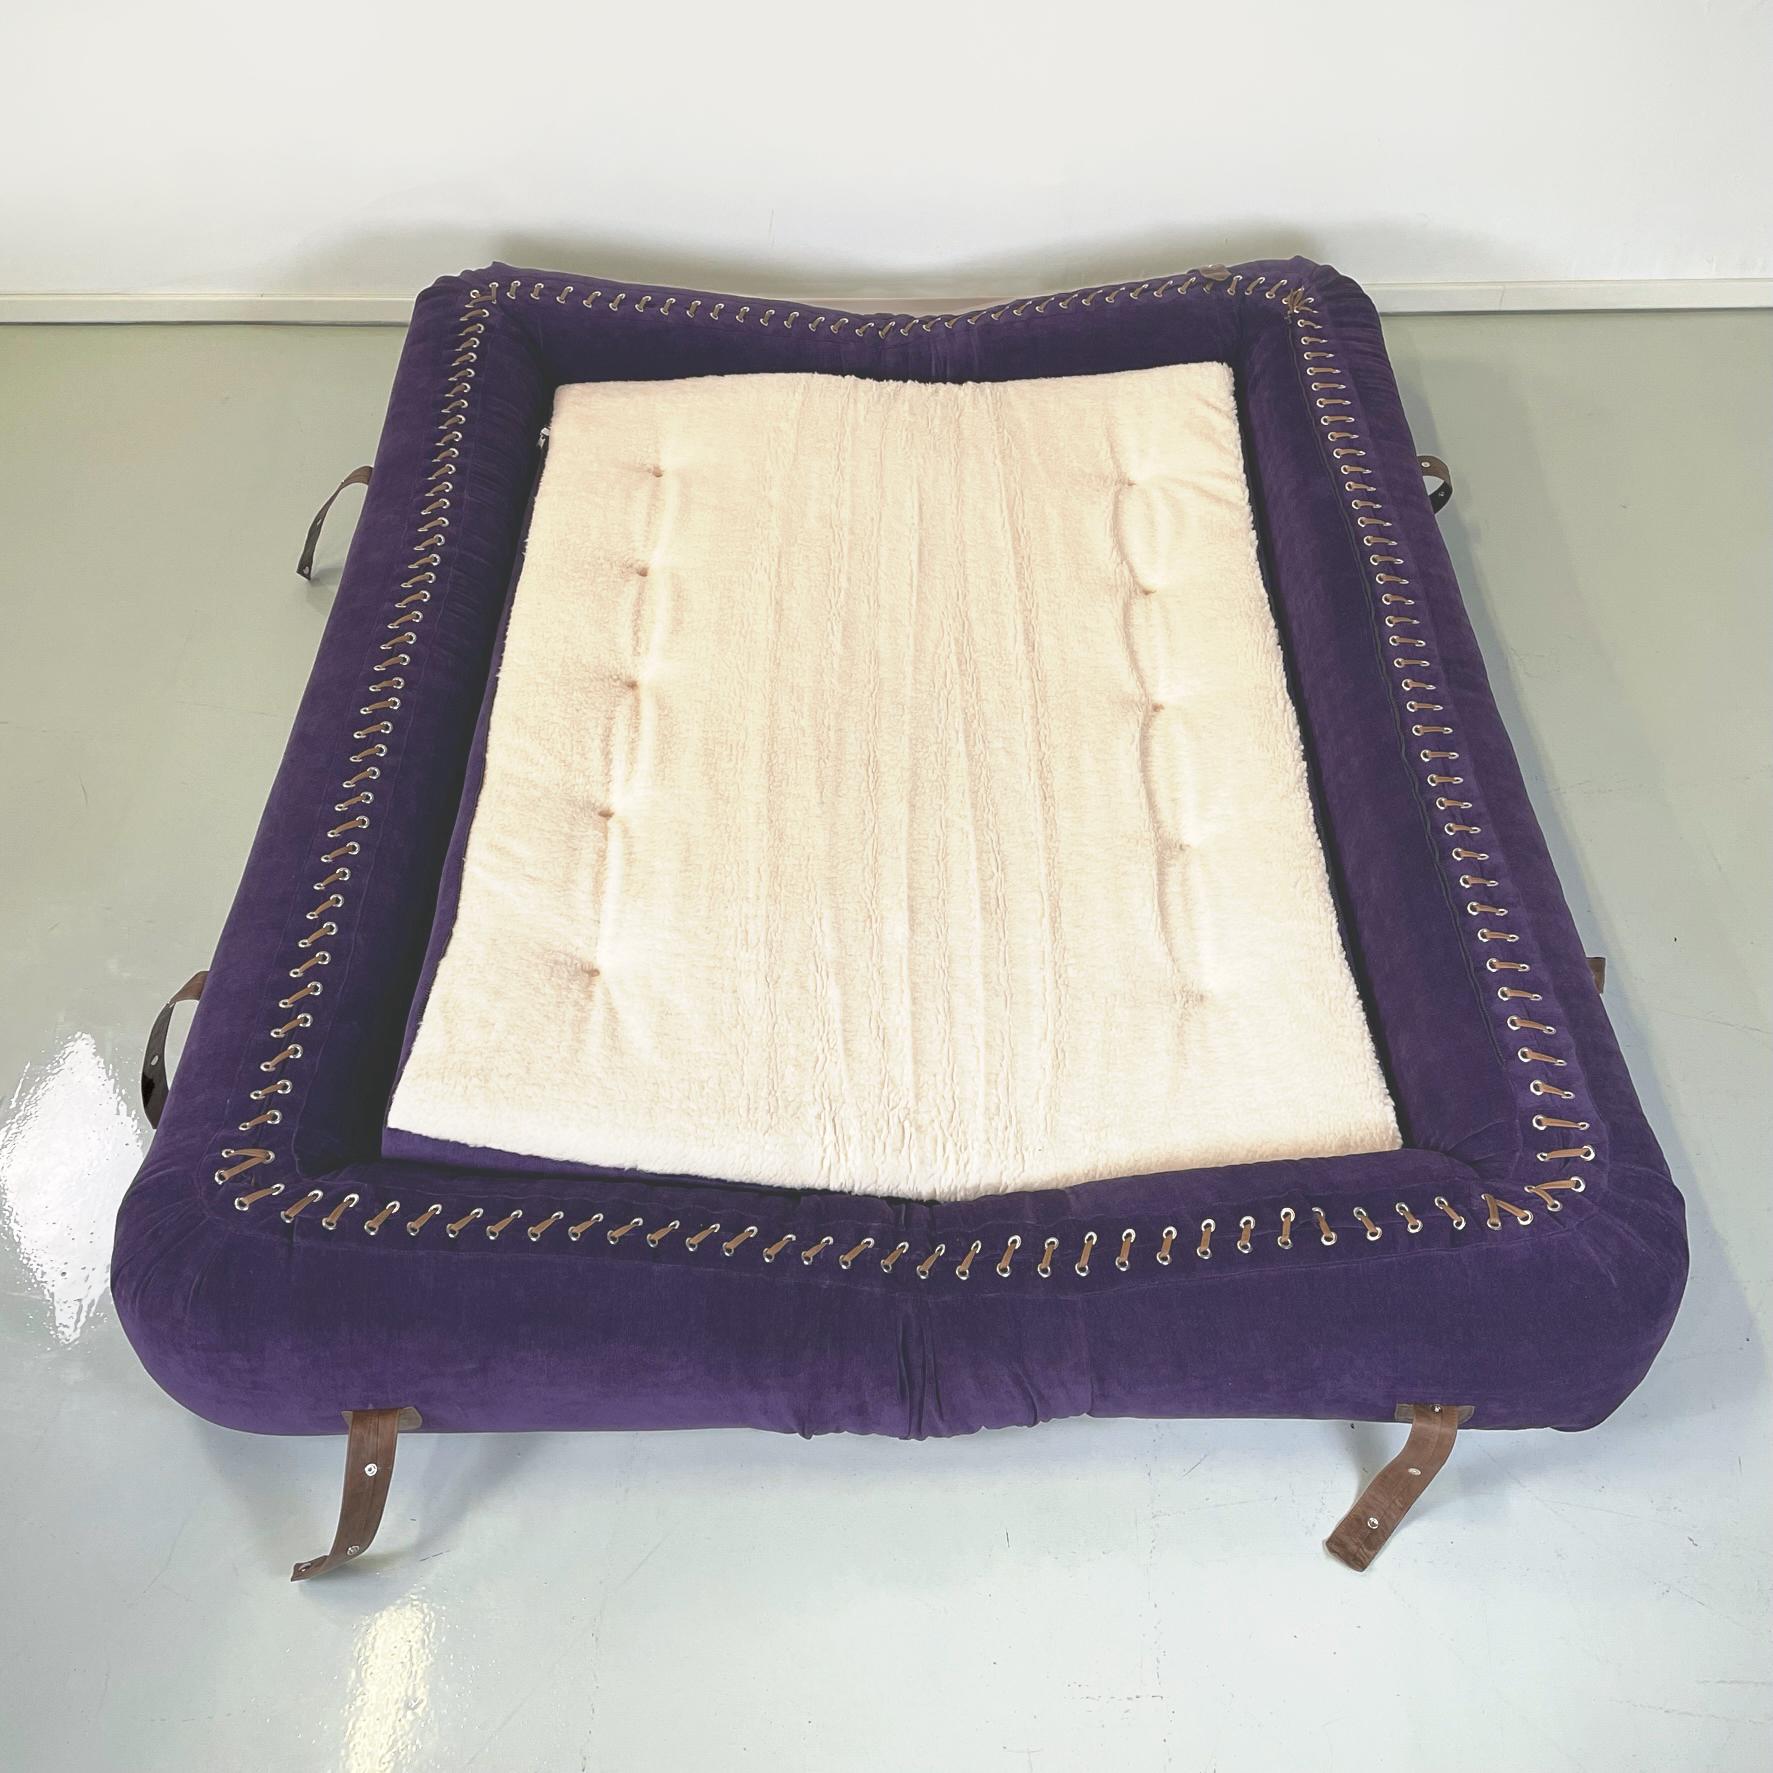 Leather Italian Modern Purple Velvet Sofa Bed Anfibio by Becchi for Giovannetti, 1970s For Sale